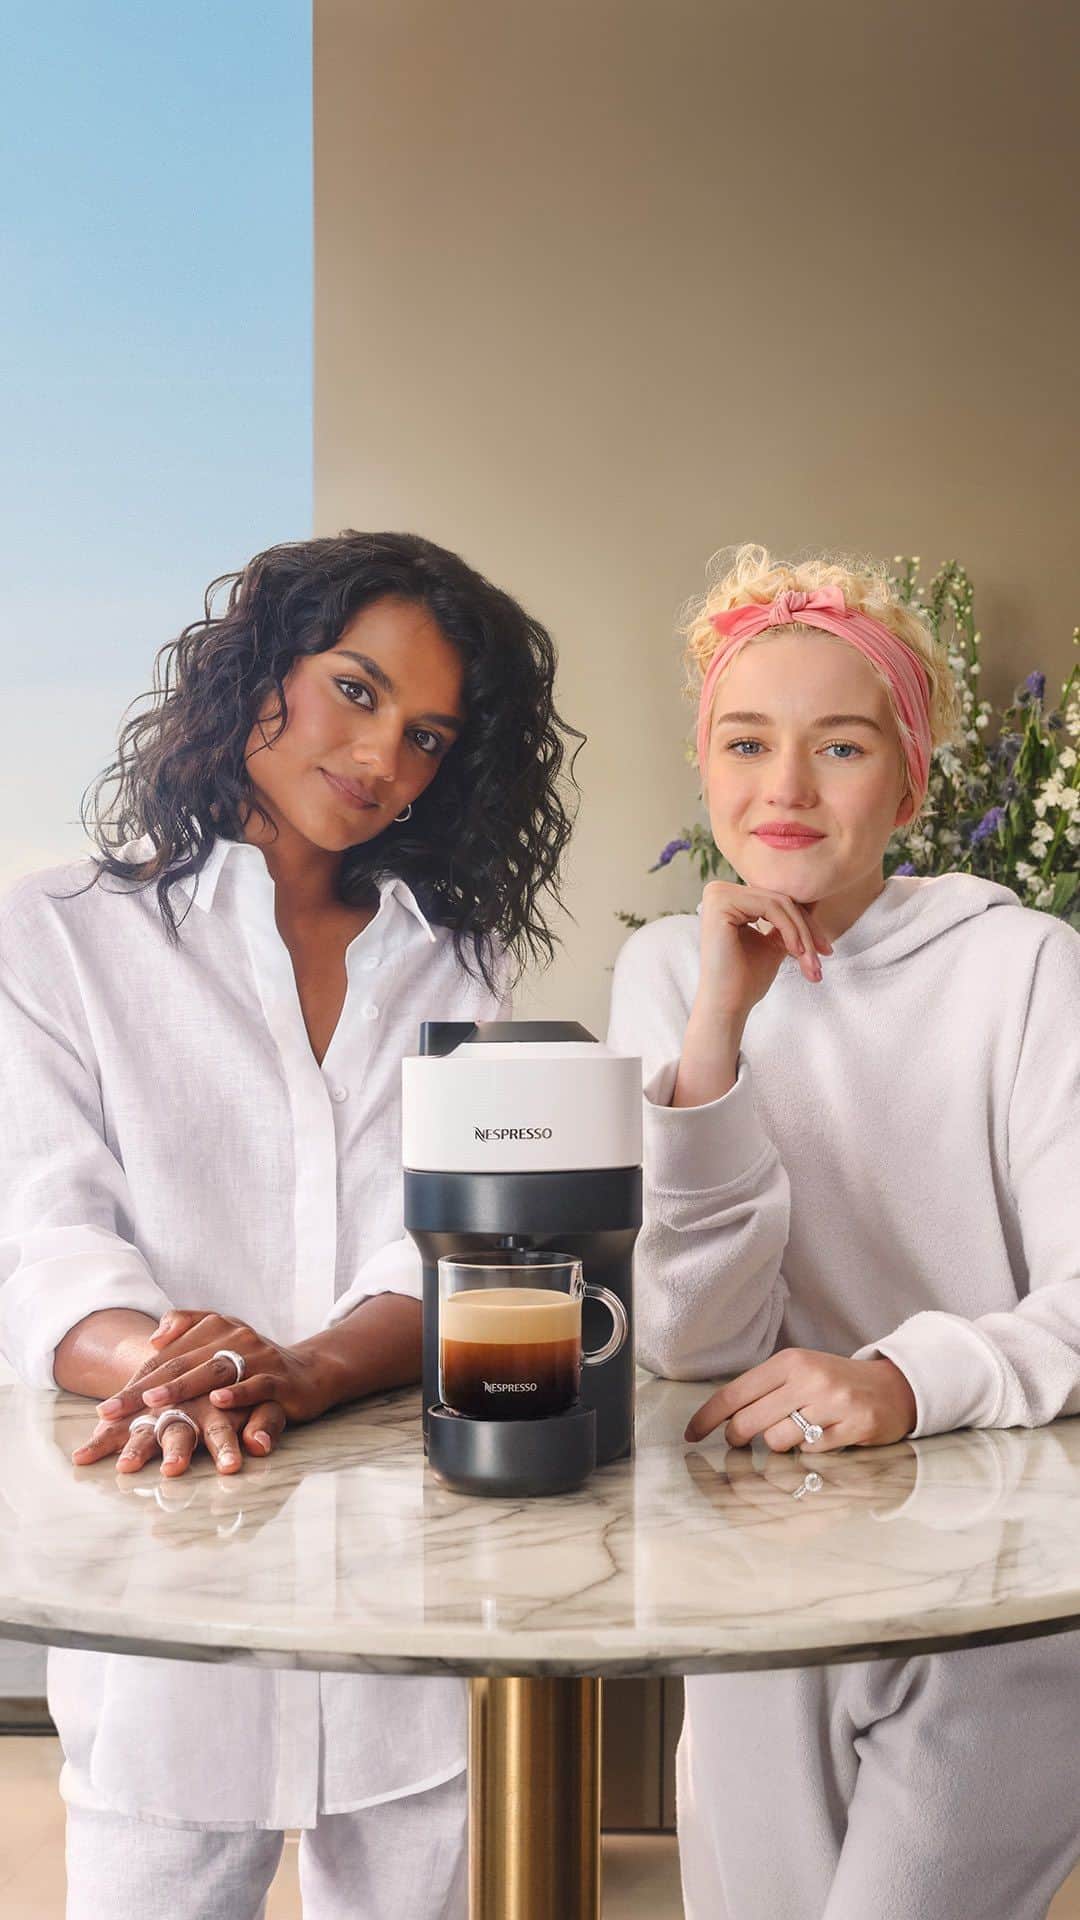 Nespressoのインスタグラム：「Unleash rich aromas and taste at the touch of a button. Vertuo’s innovative brewing parameters bring superior coffee quality to your home every day.  #UnforgettableTaste #Incomparablecoffeeexperience」